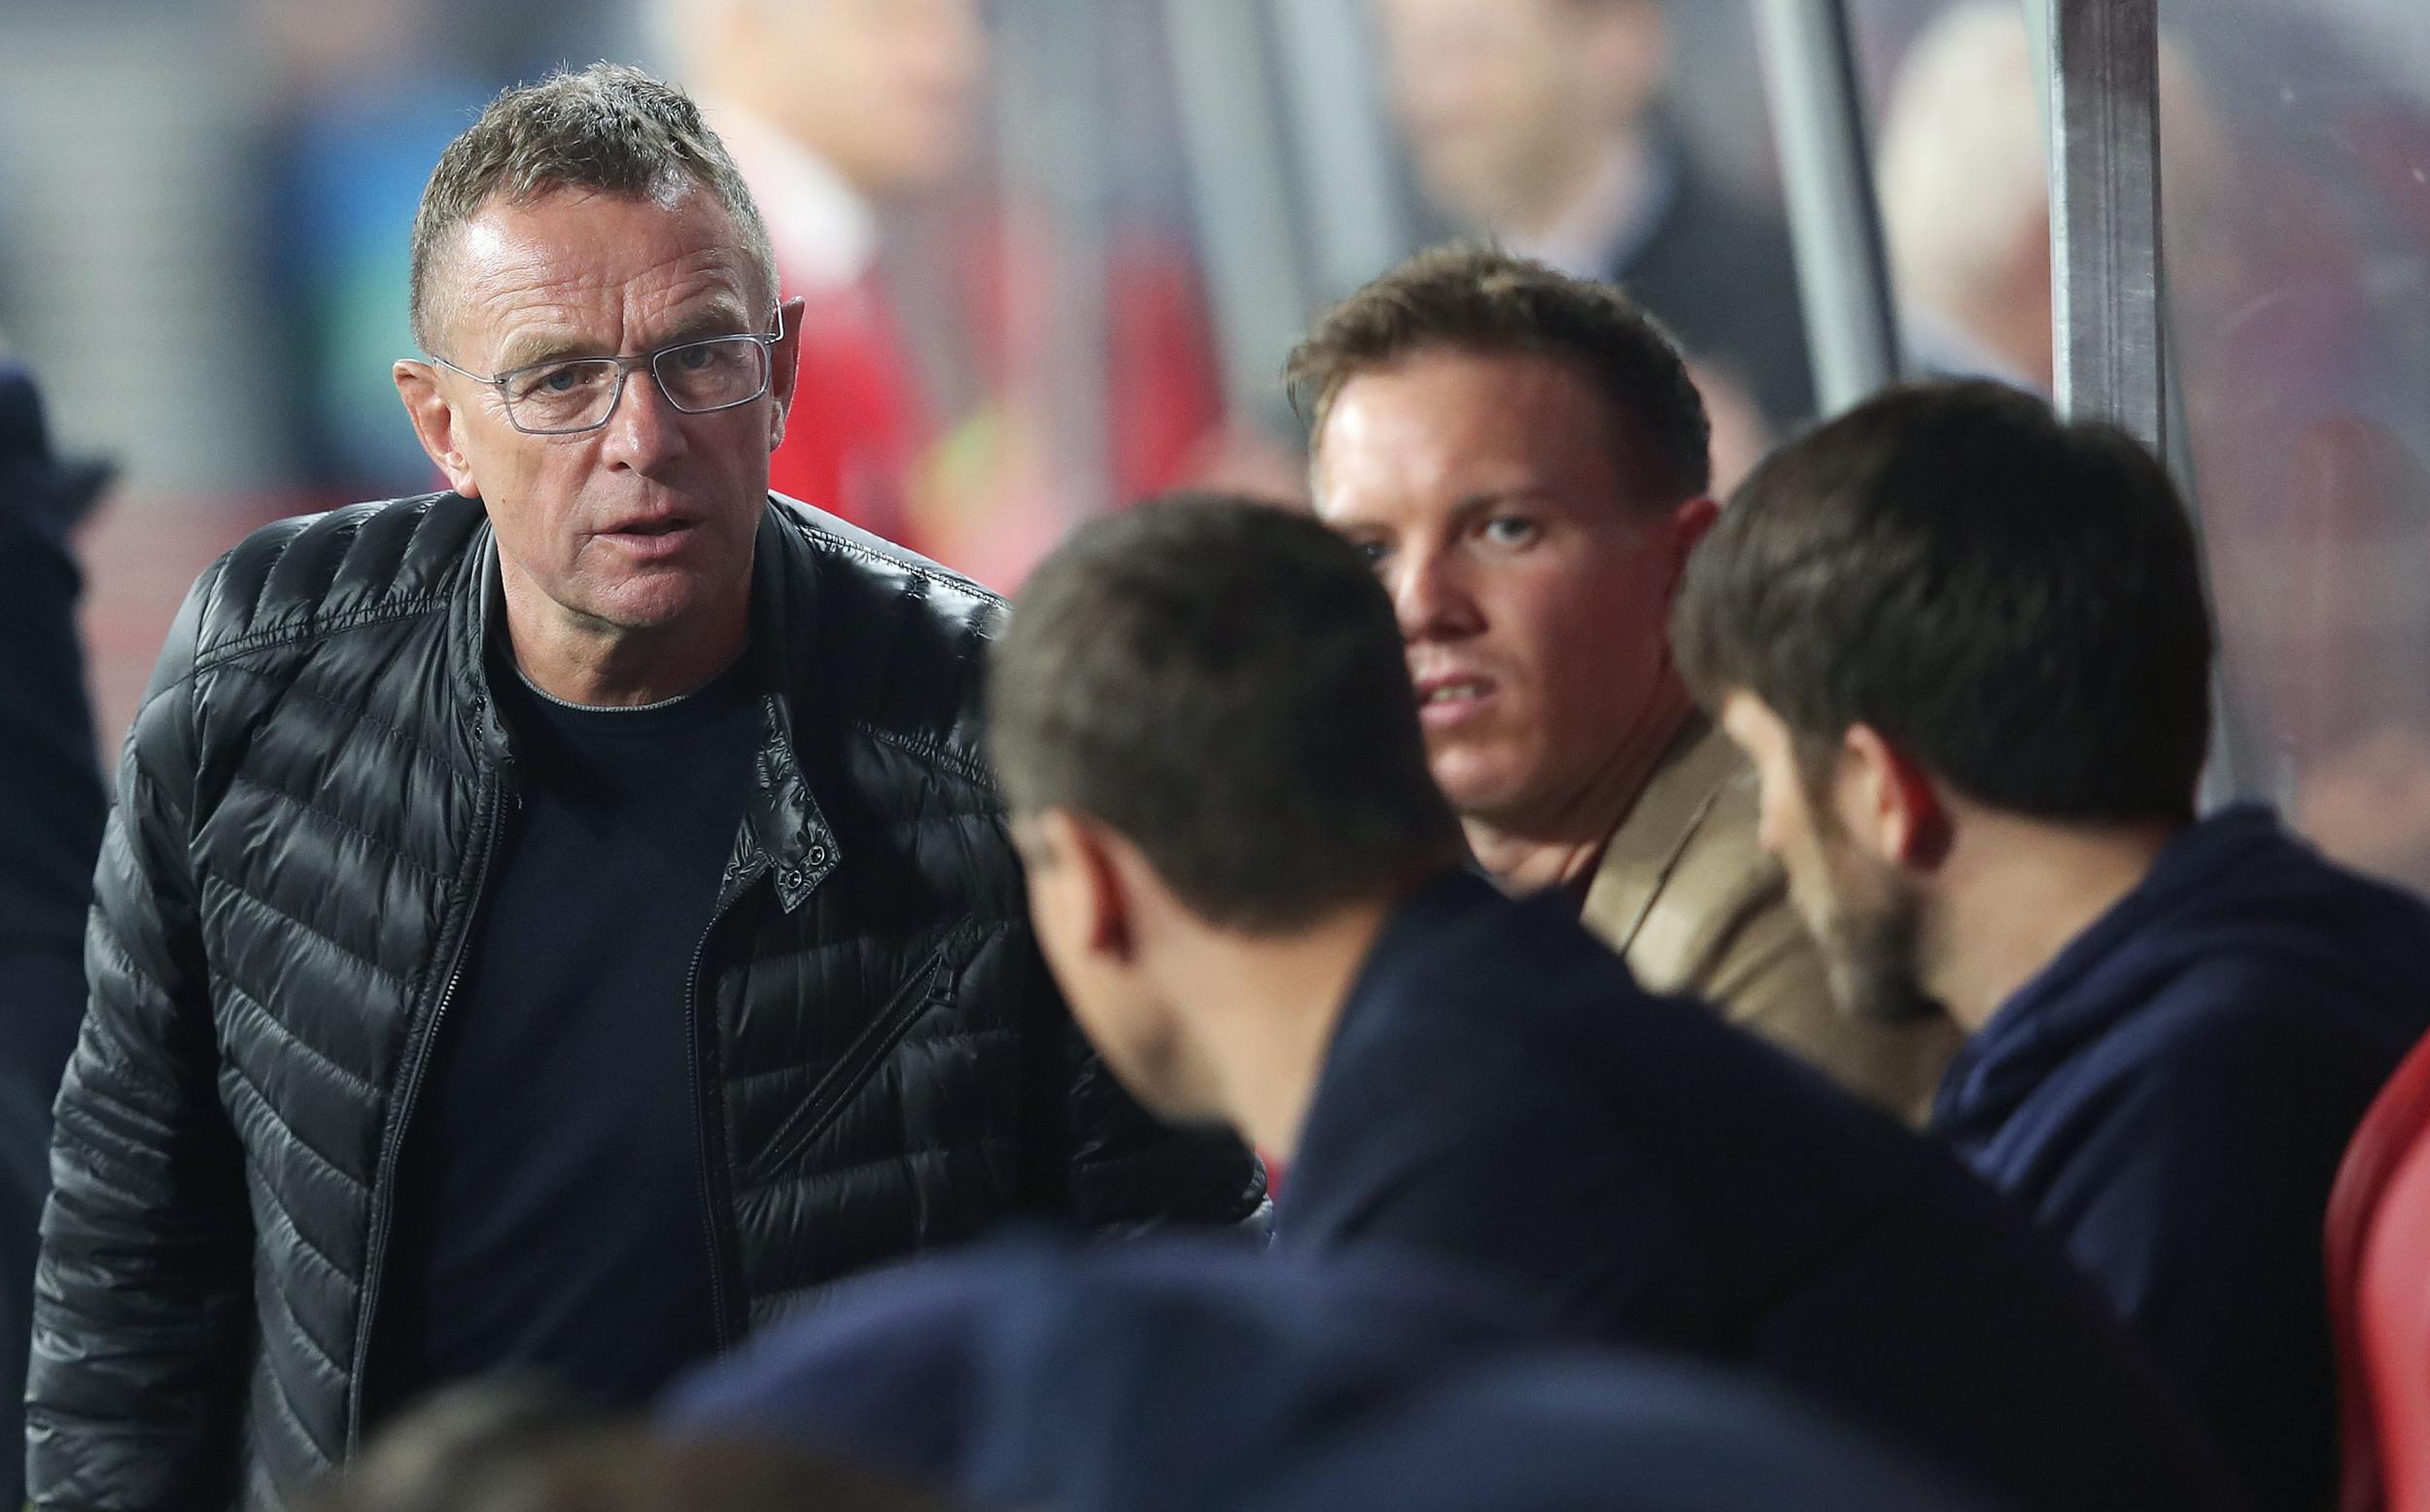 Ralph Rangnick, head of sport and development at Red Bull, with Nagelsmann (AFP via Getty)